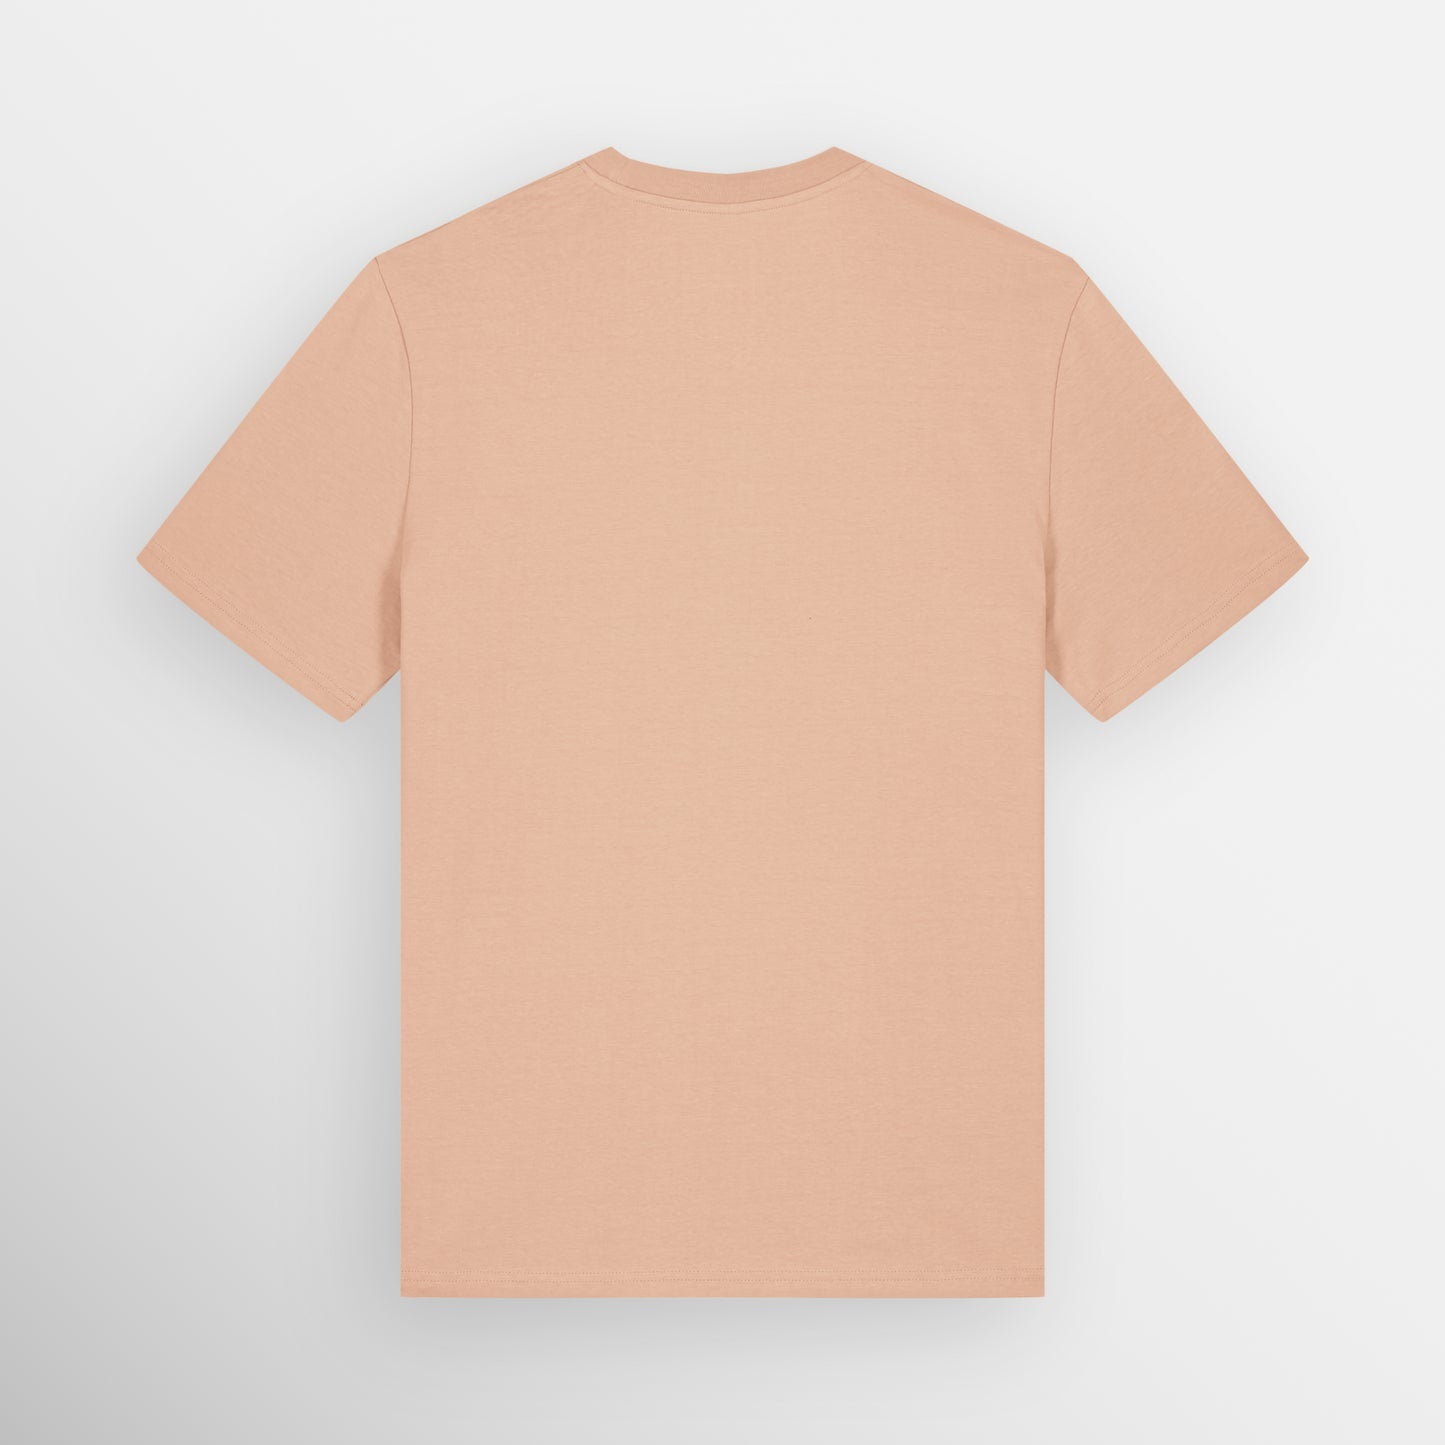 Image shows the plain back of the Fresh Peach coloured regular fit t-shirt.